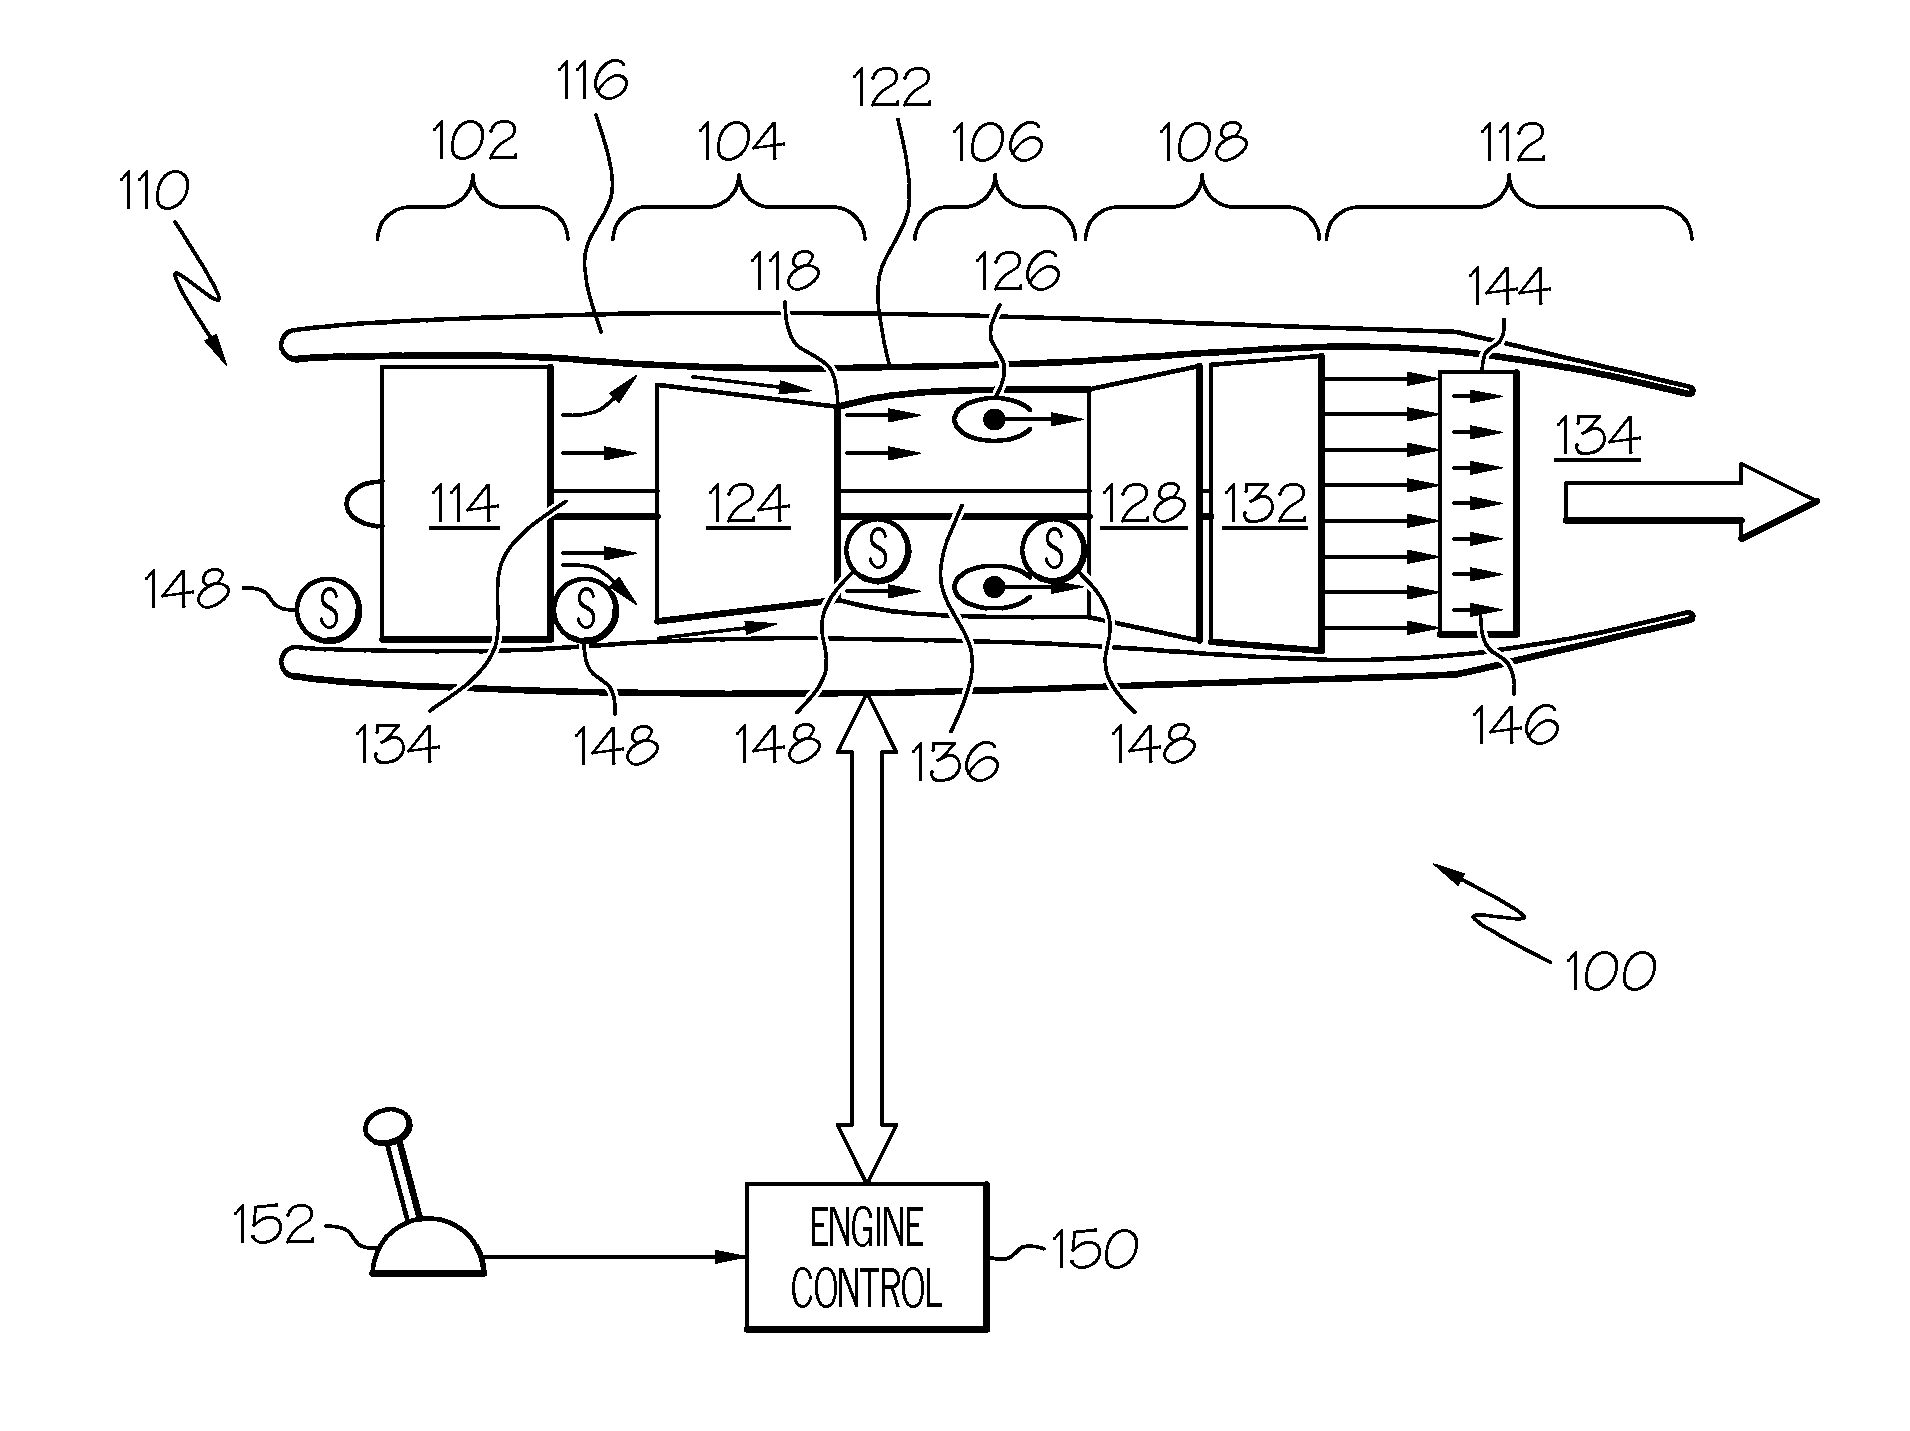 System and method for controlling a gas turbine engine afterburner